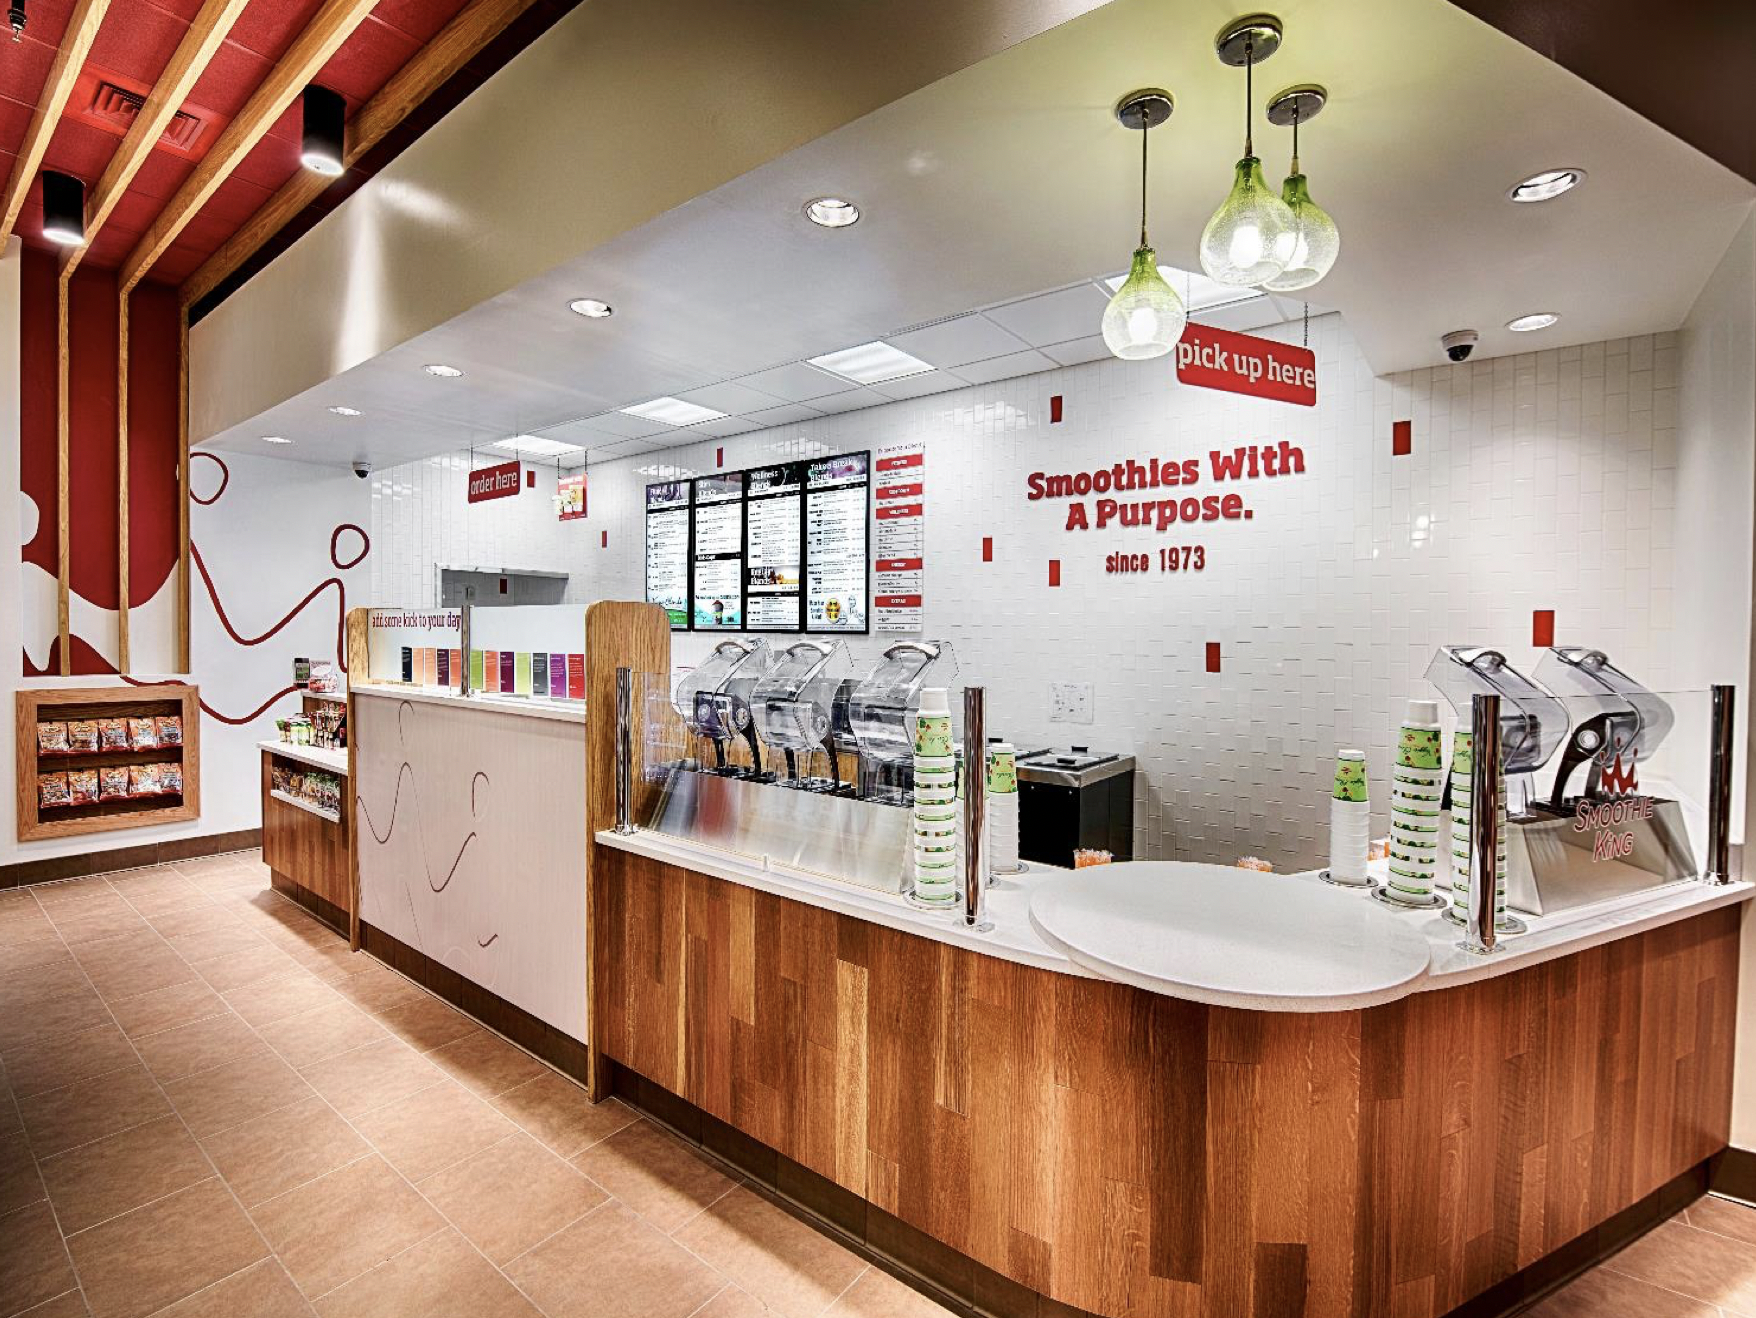 Smoothie King Restaurants built by CAM Development Group